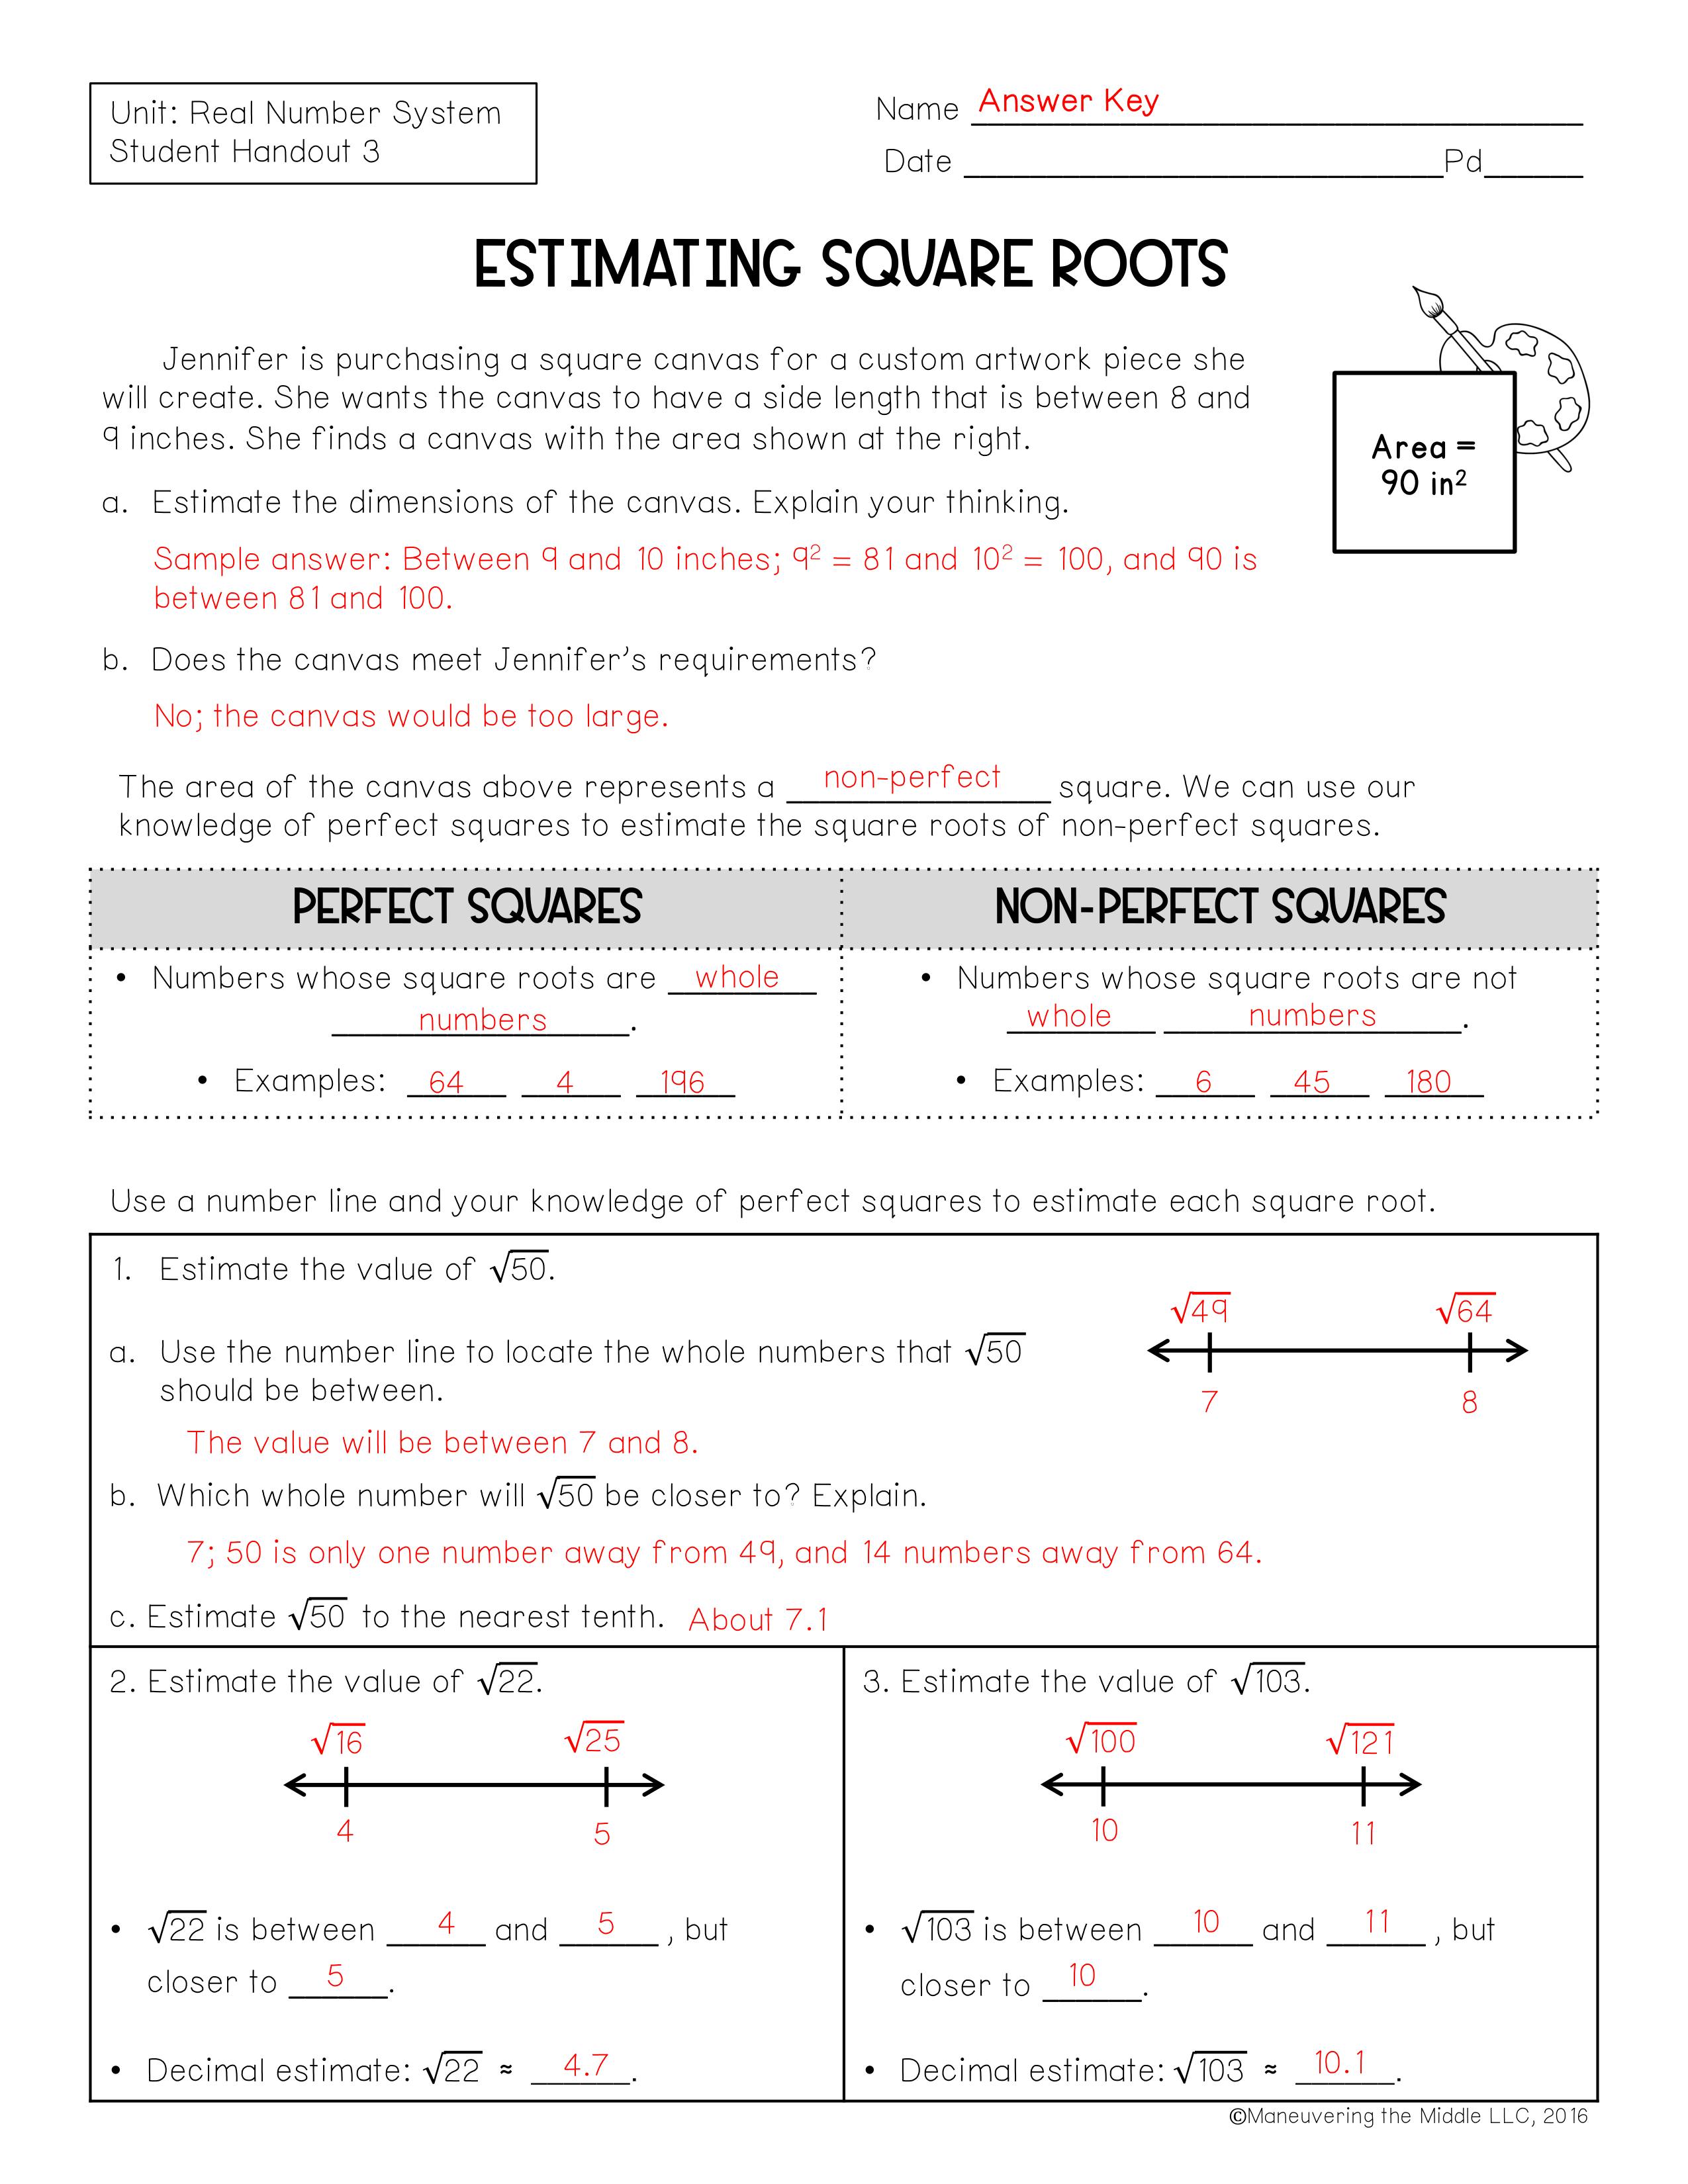 Estimating Square Roots-1.png